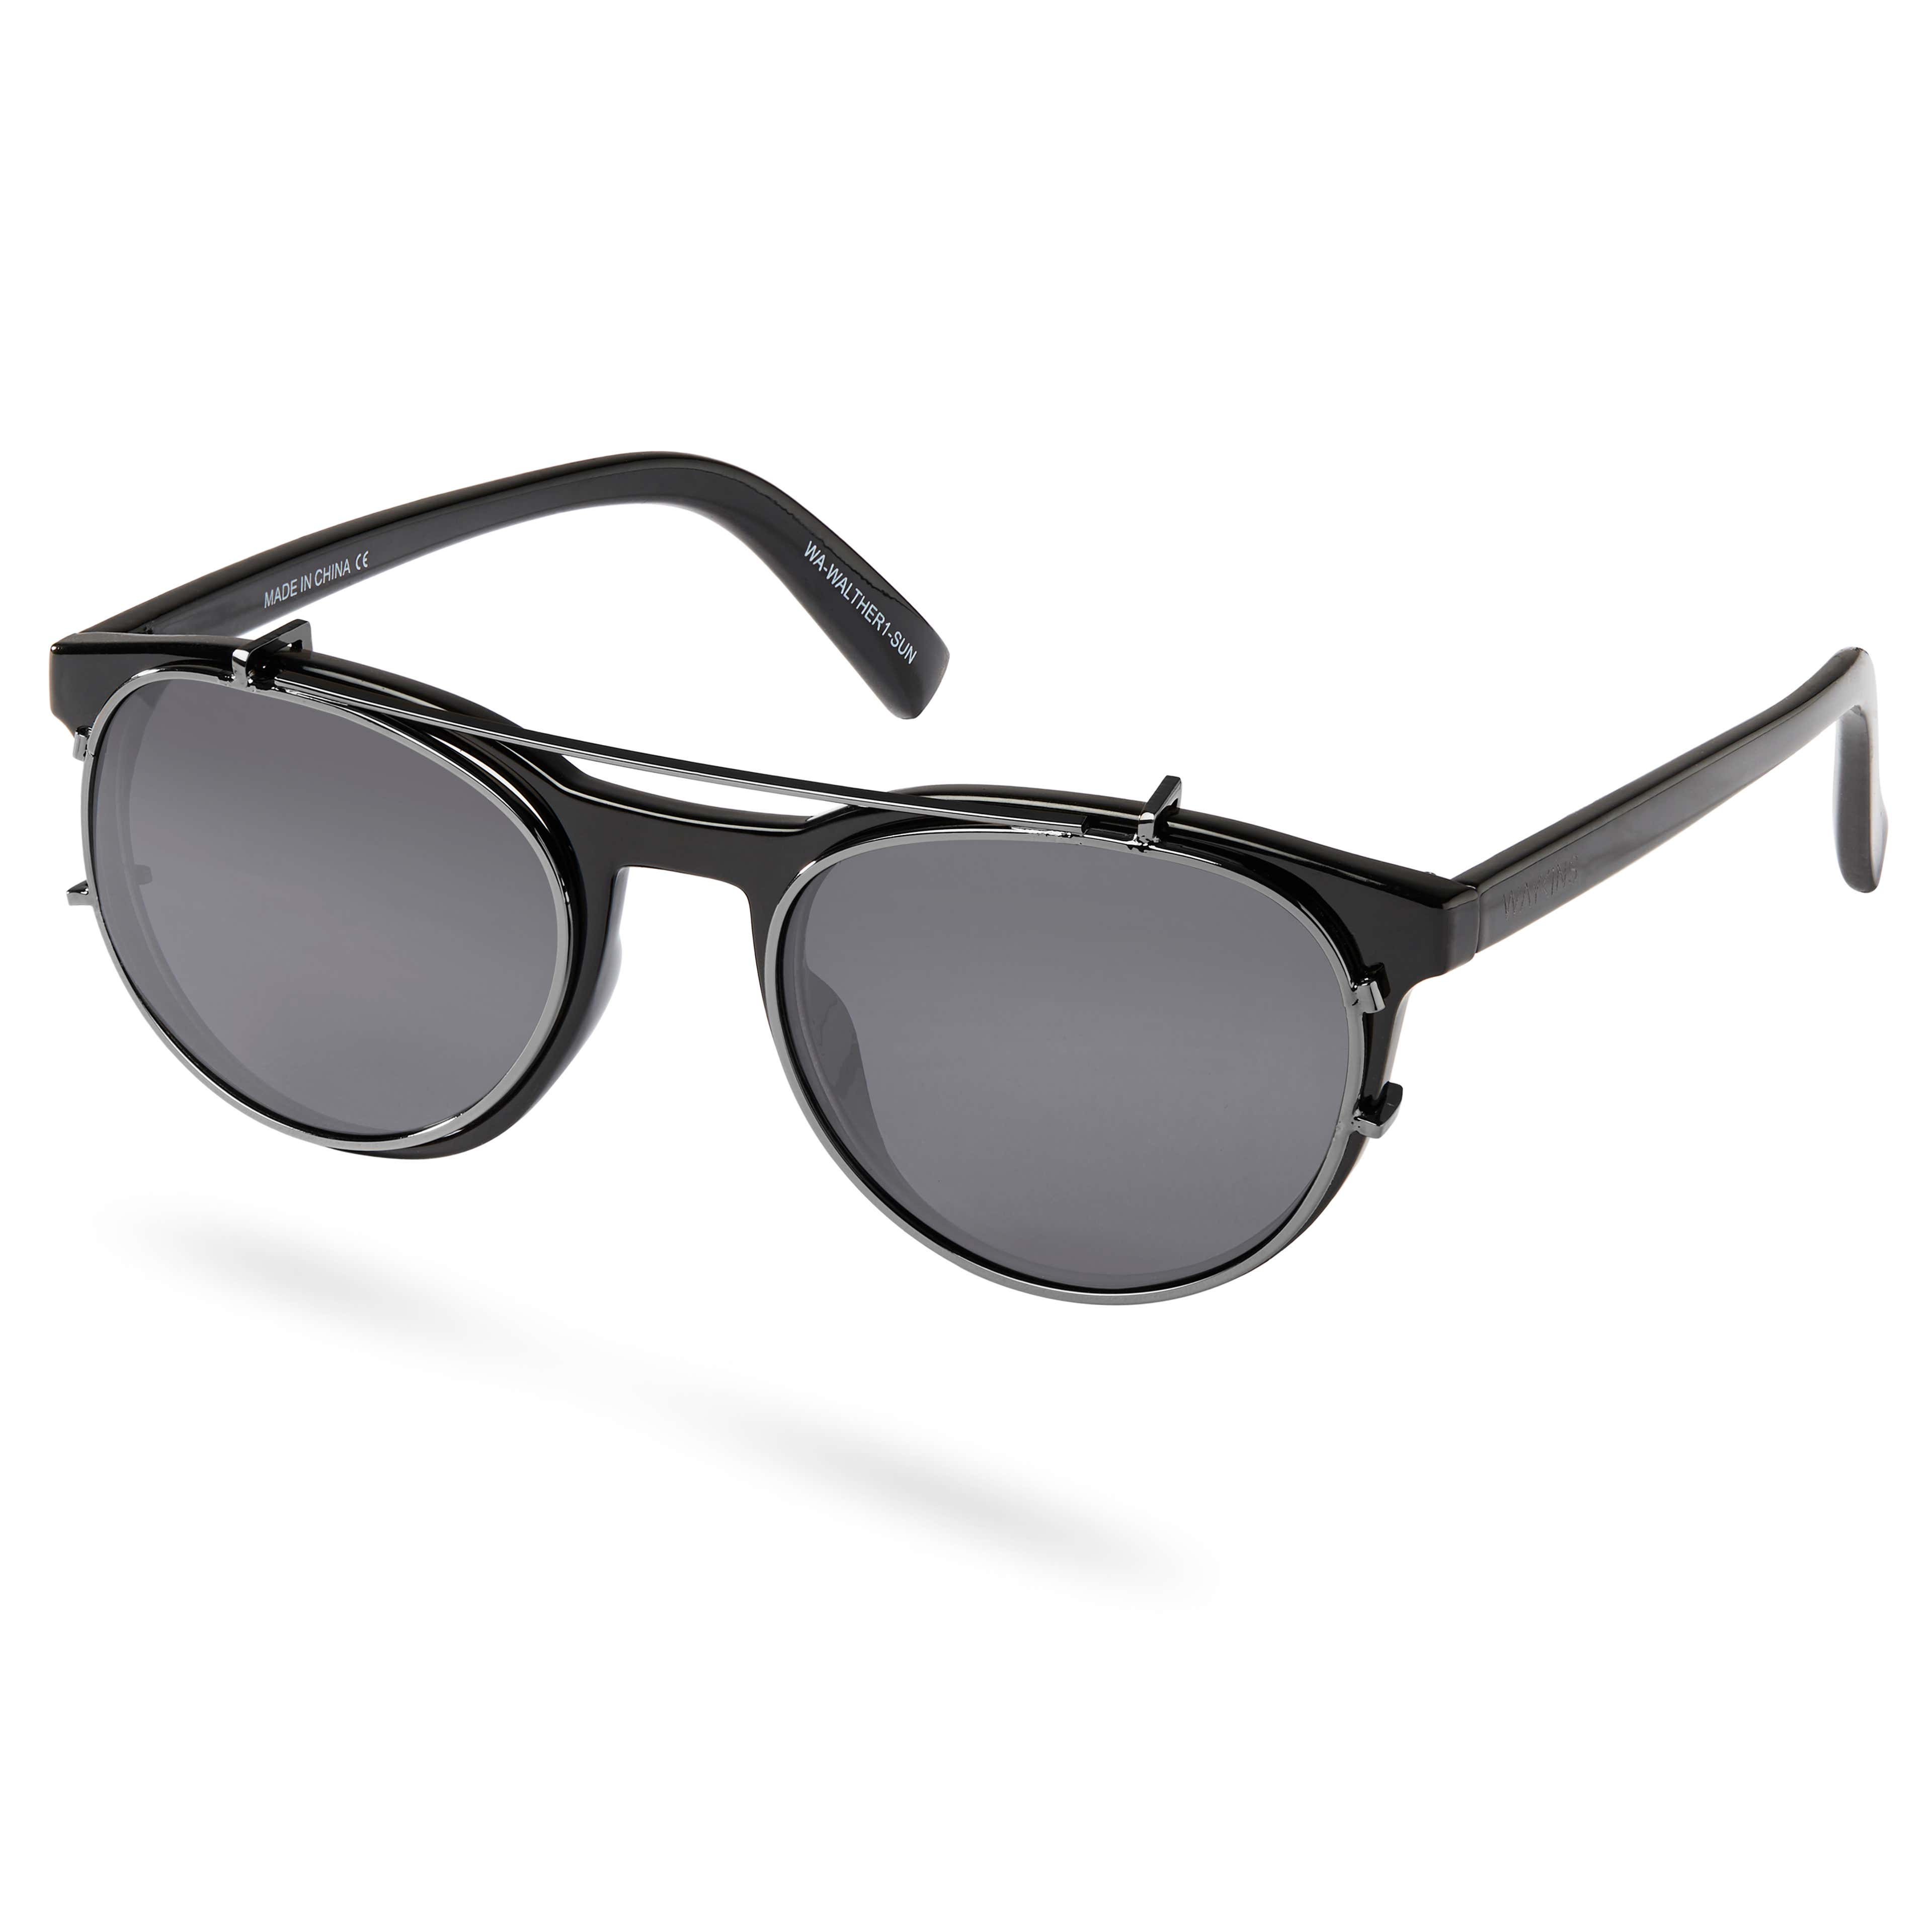 Walther Black Clear Lens Vista Glasses with Clip-On Shades